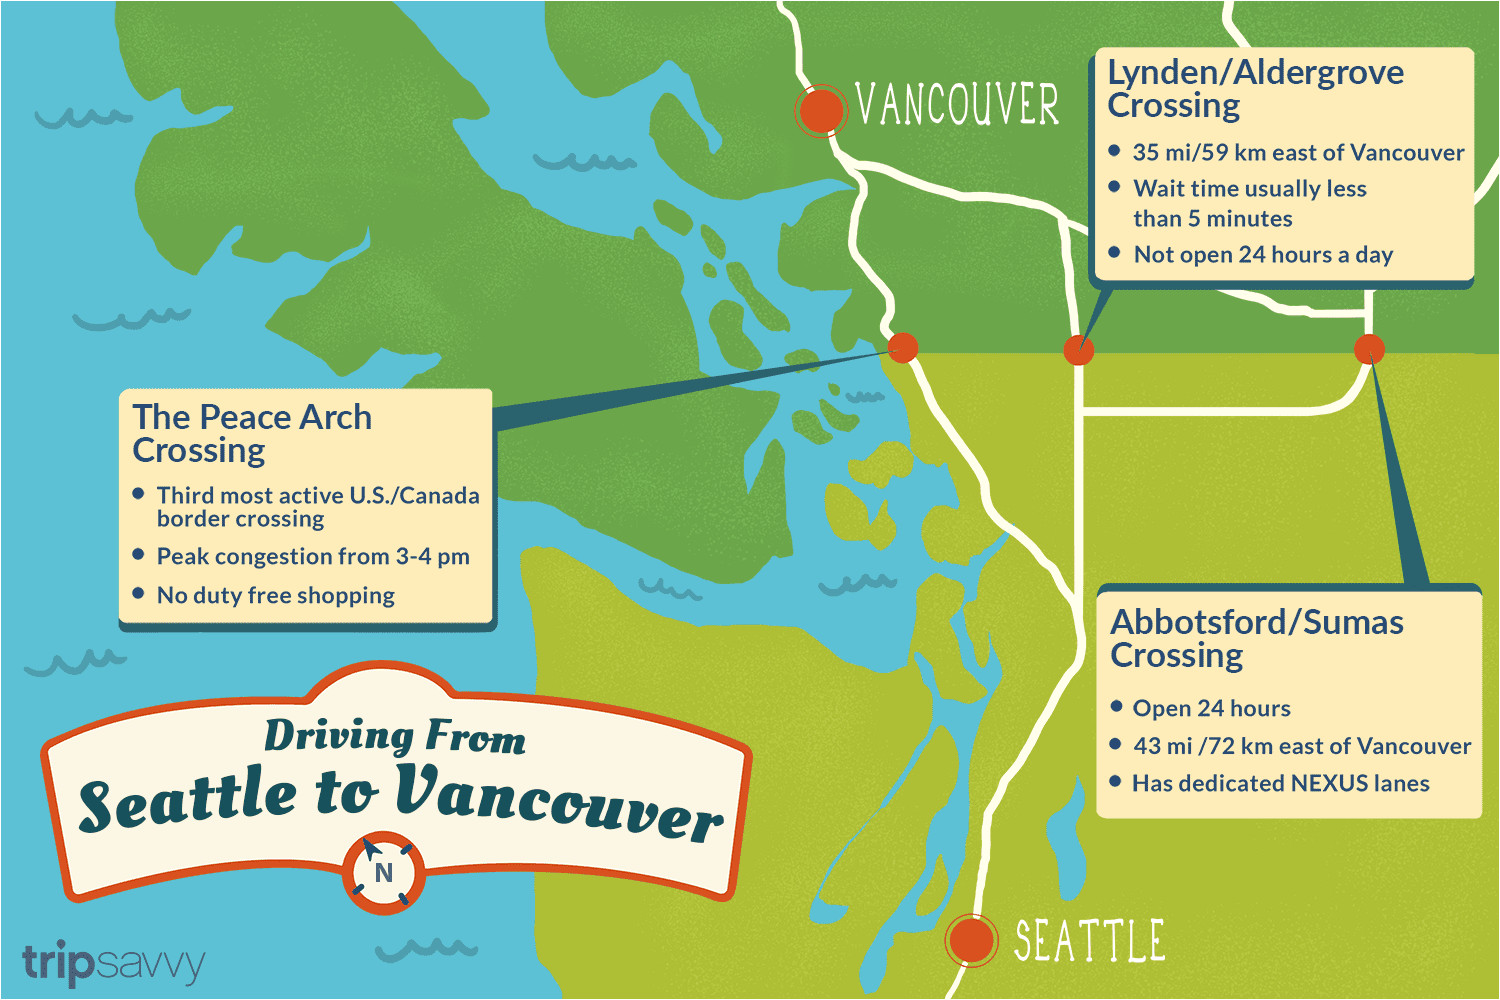 seattle to vancouver border crossings 1481637 final ac 5c4f26dc4cedfd0001ddb567 png